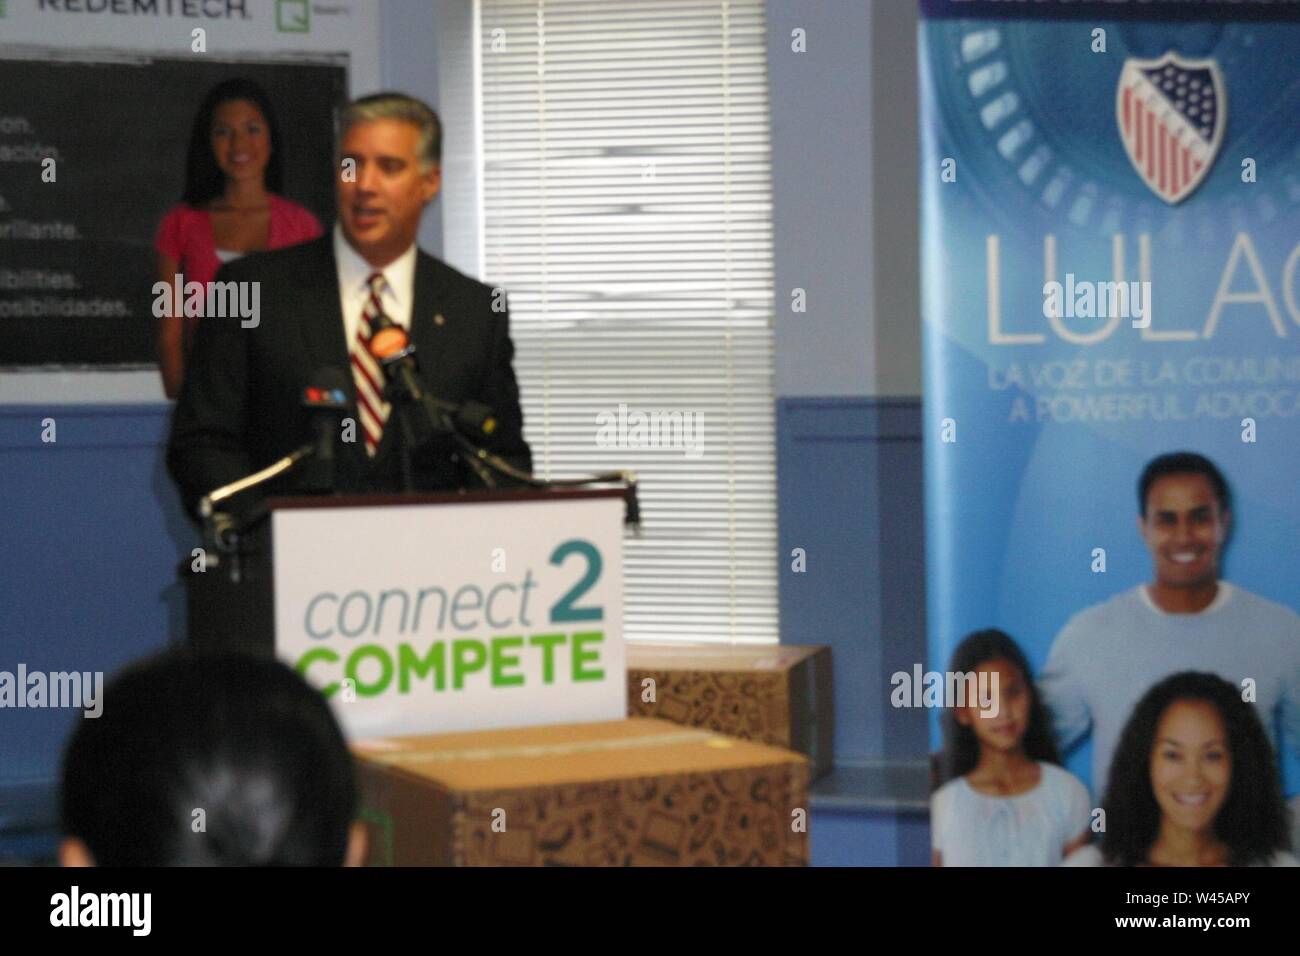 Connect 2 Compete - LULAC 8.7.12. Stock Photo